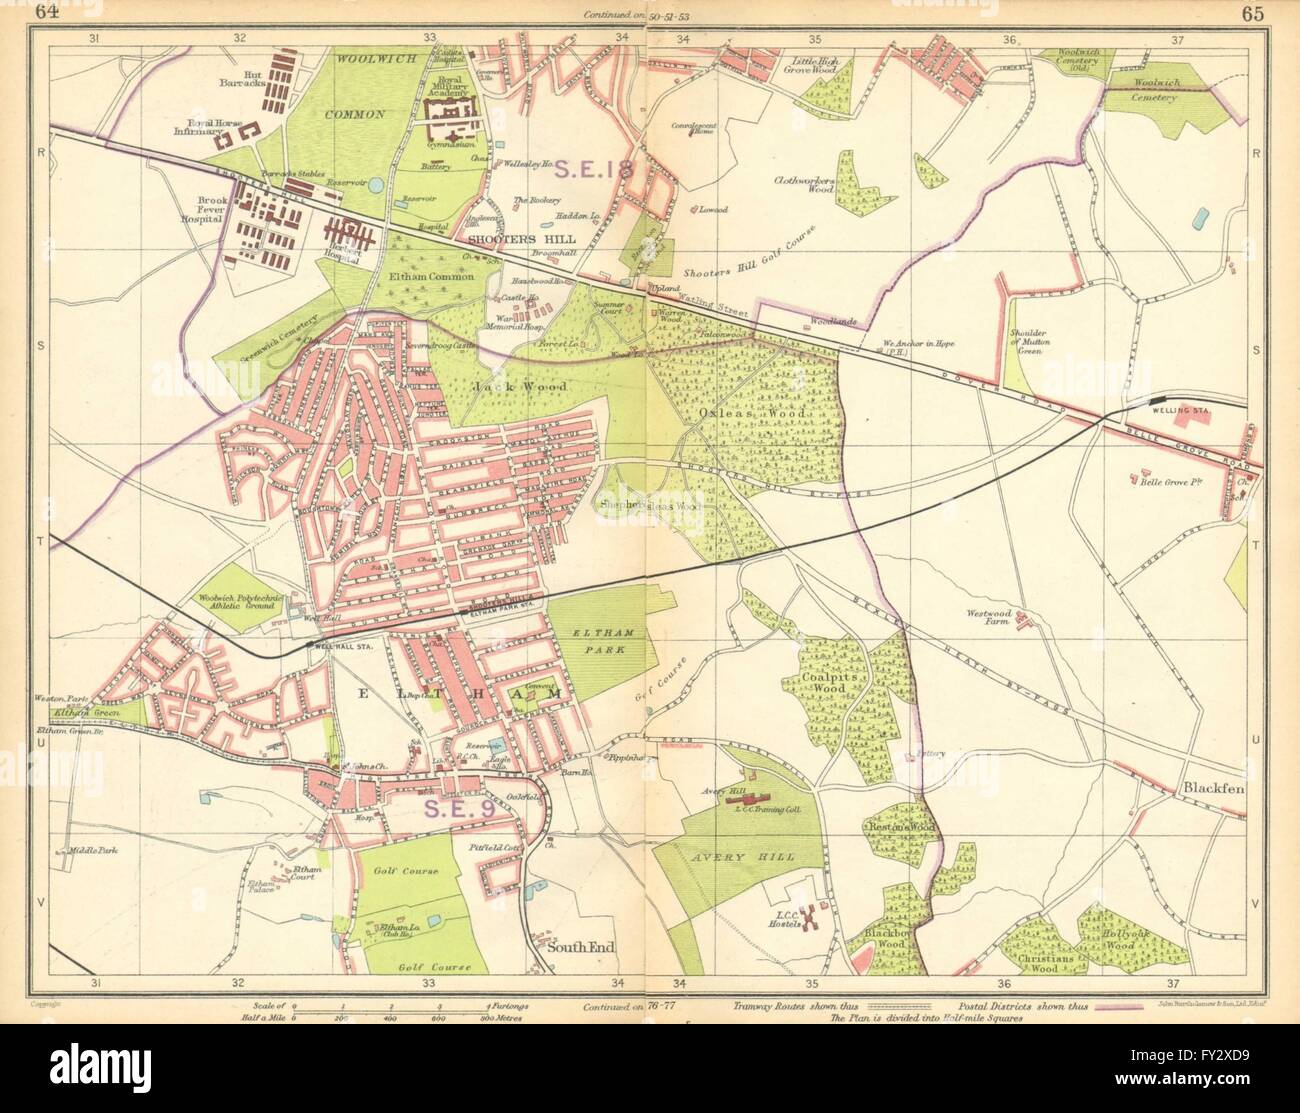 LONDON SE: Eltham Shooters Hill South End Welling Blackfen Avery Hill, 1925 map Stock Photo